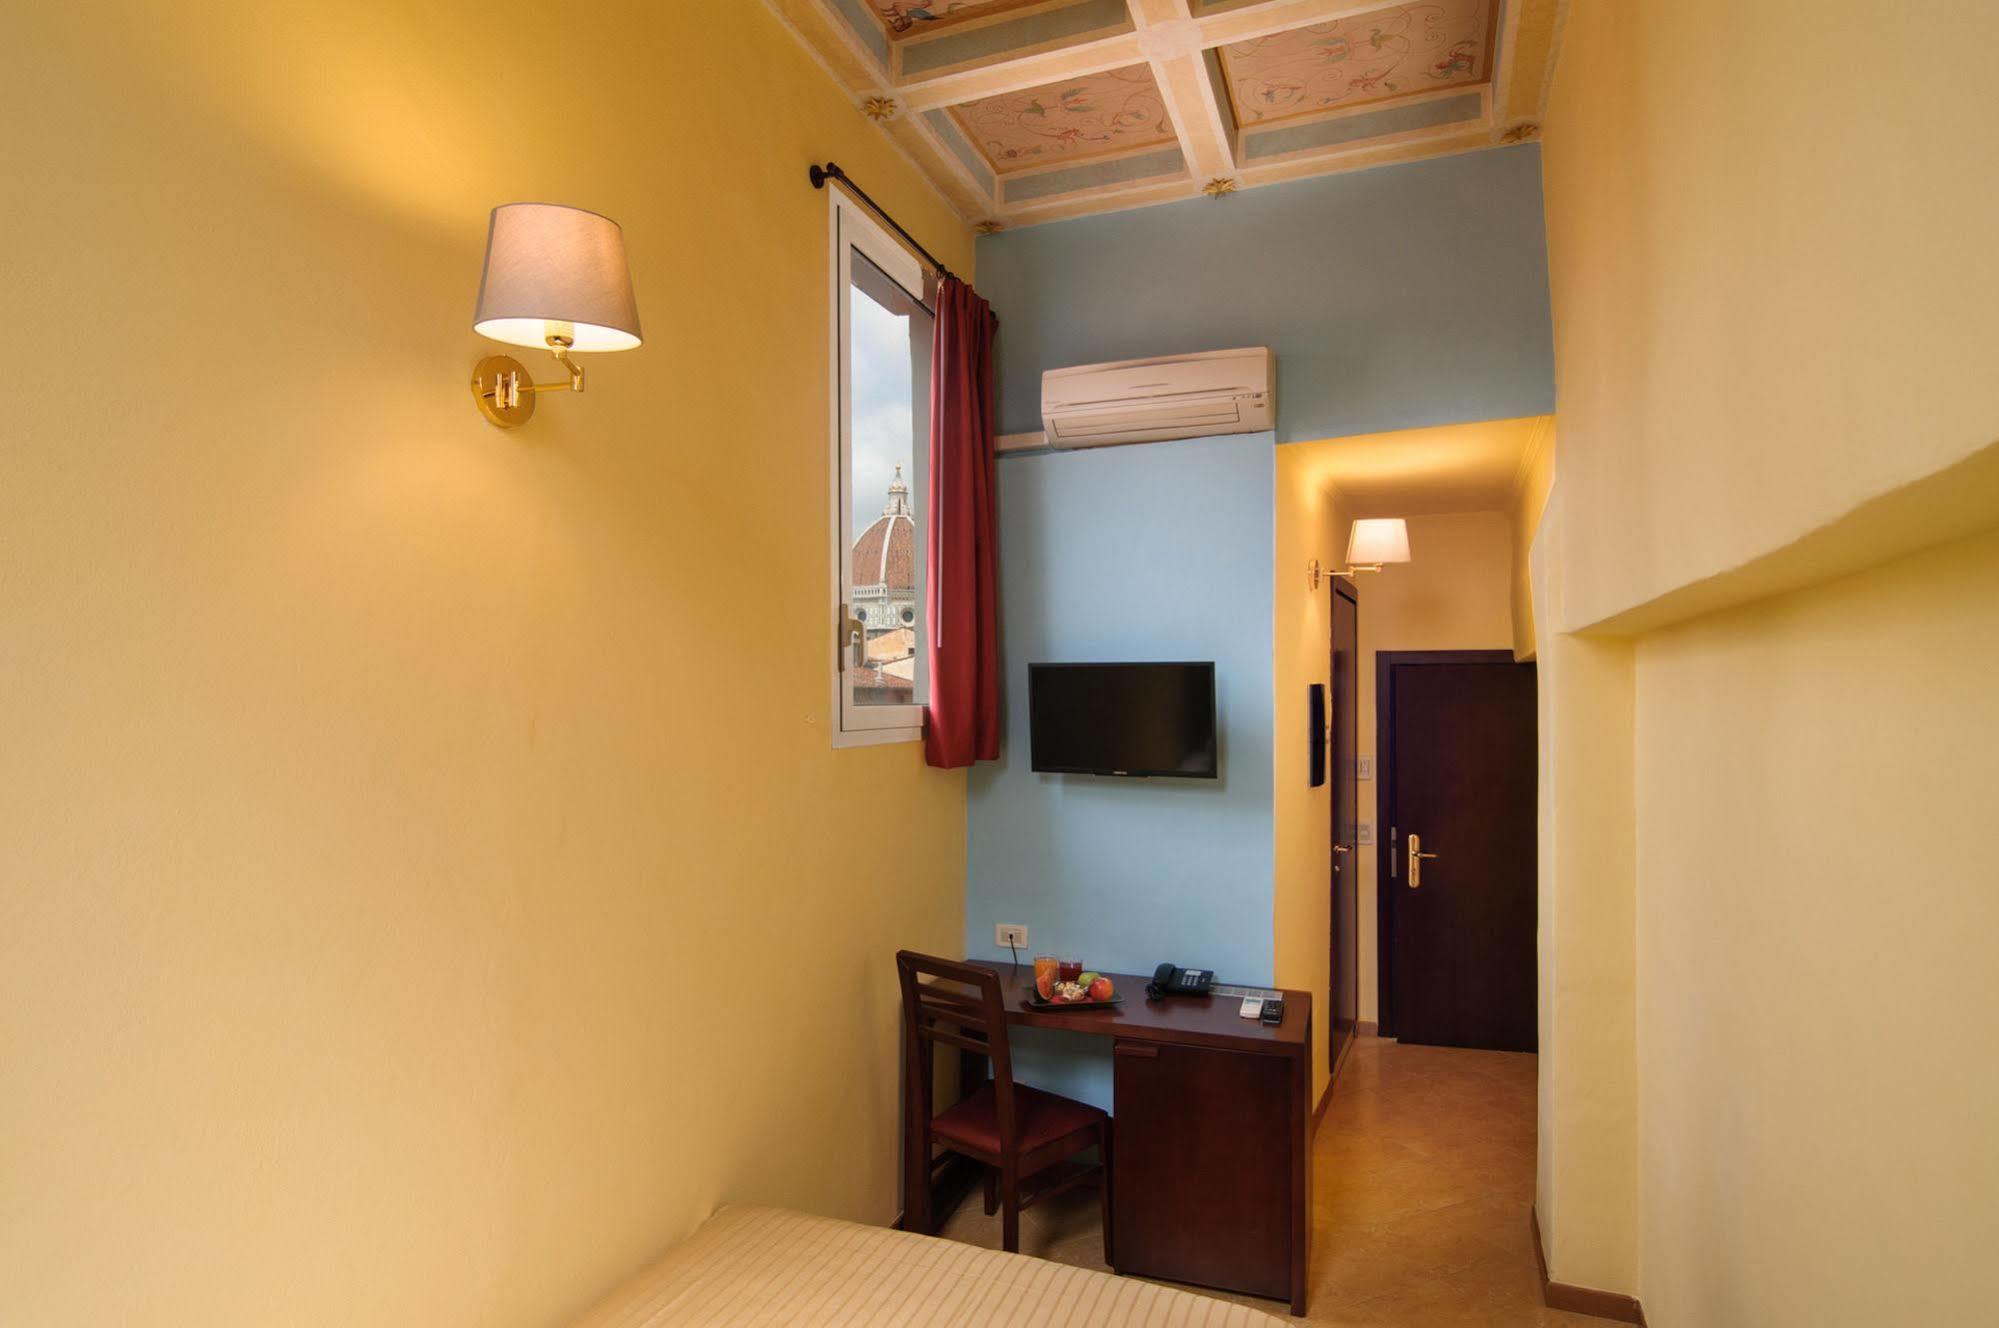 Hotel Cardinal Of Florence - Recommended For Ages 25 To 55 Exterior foto